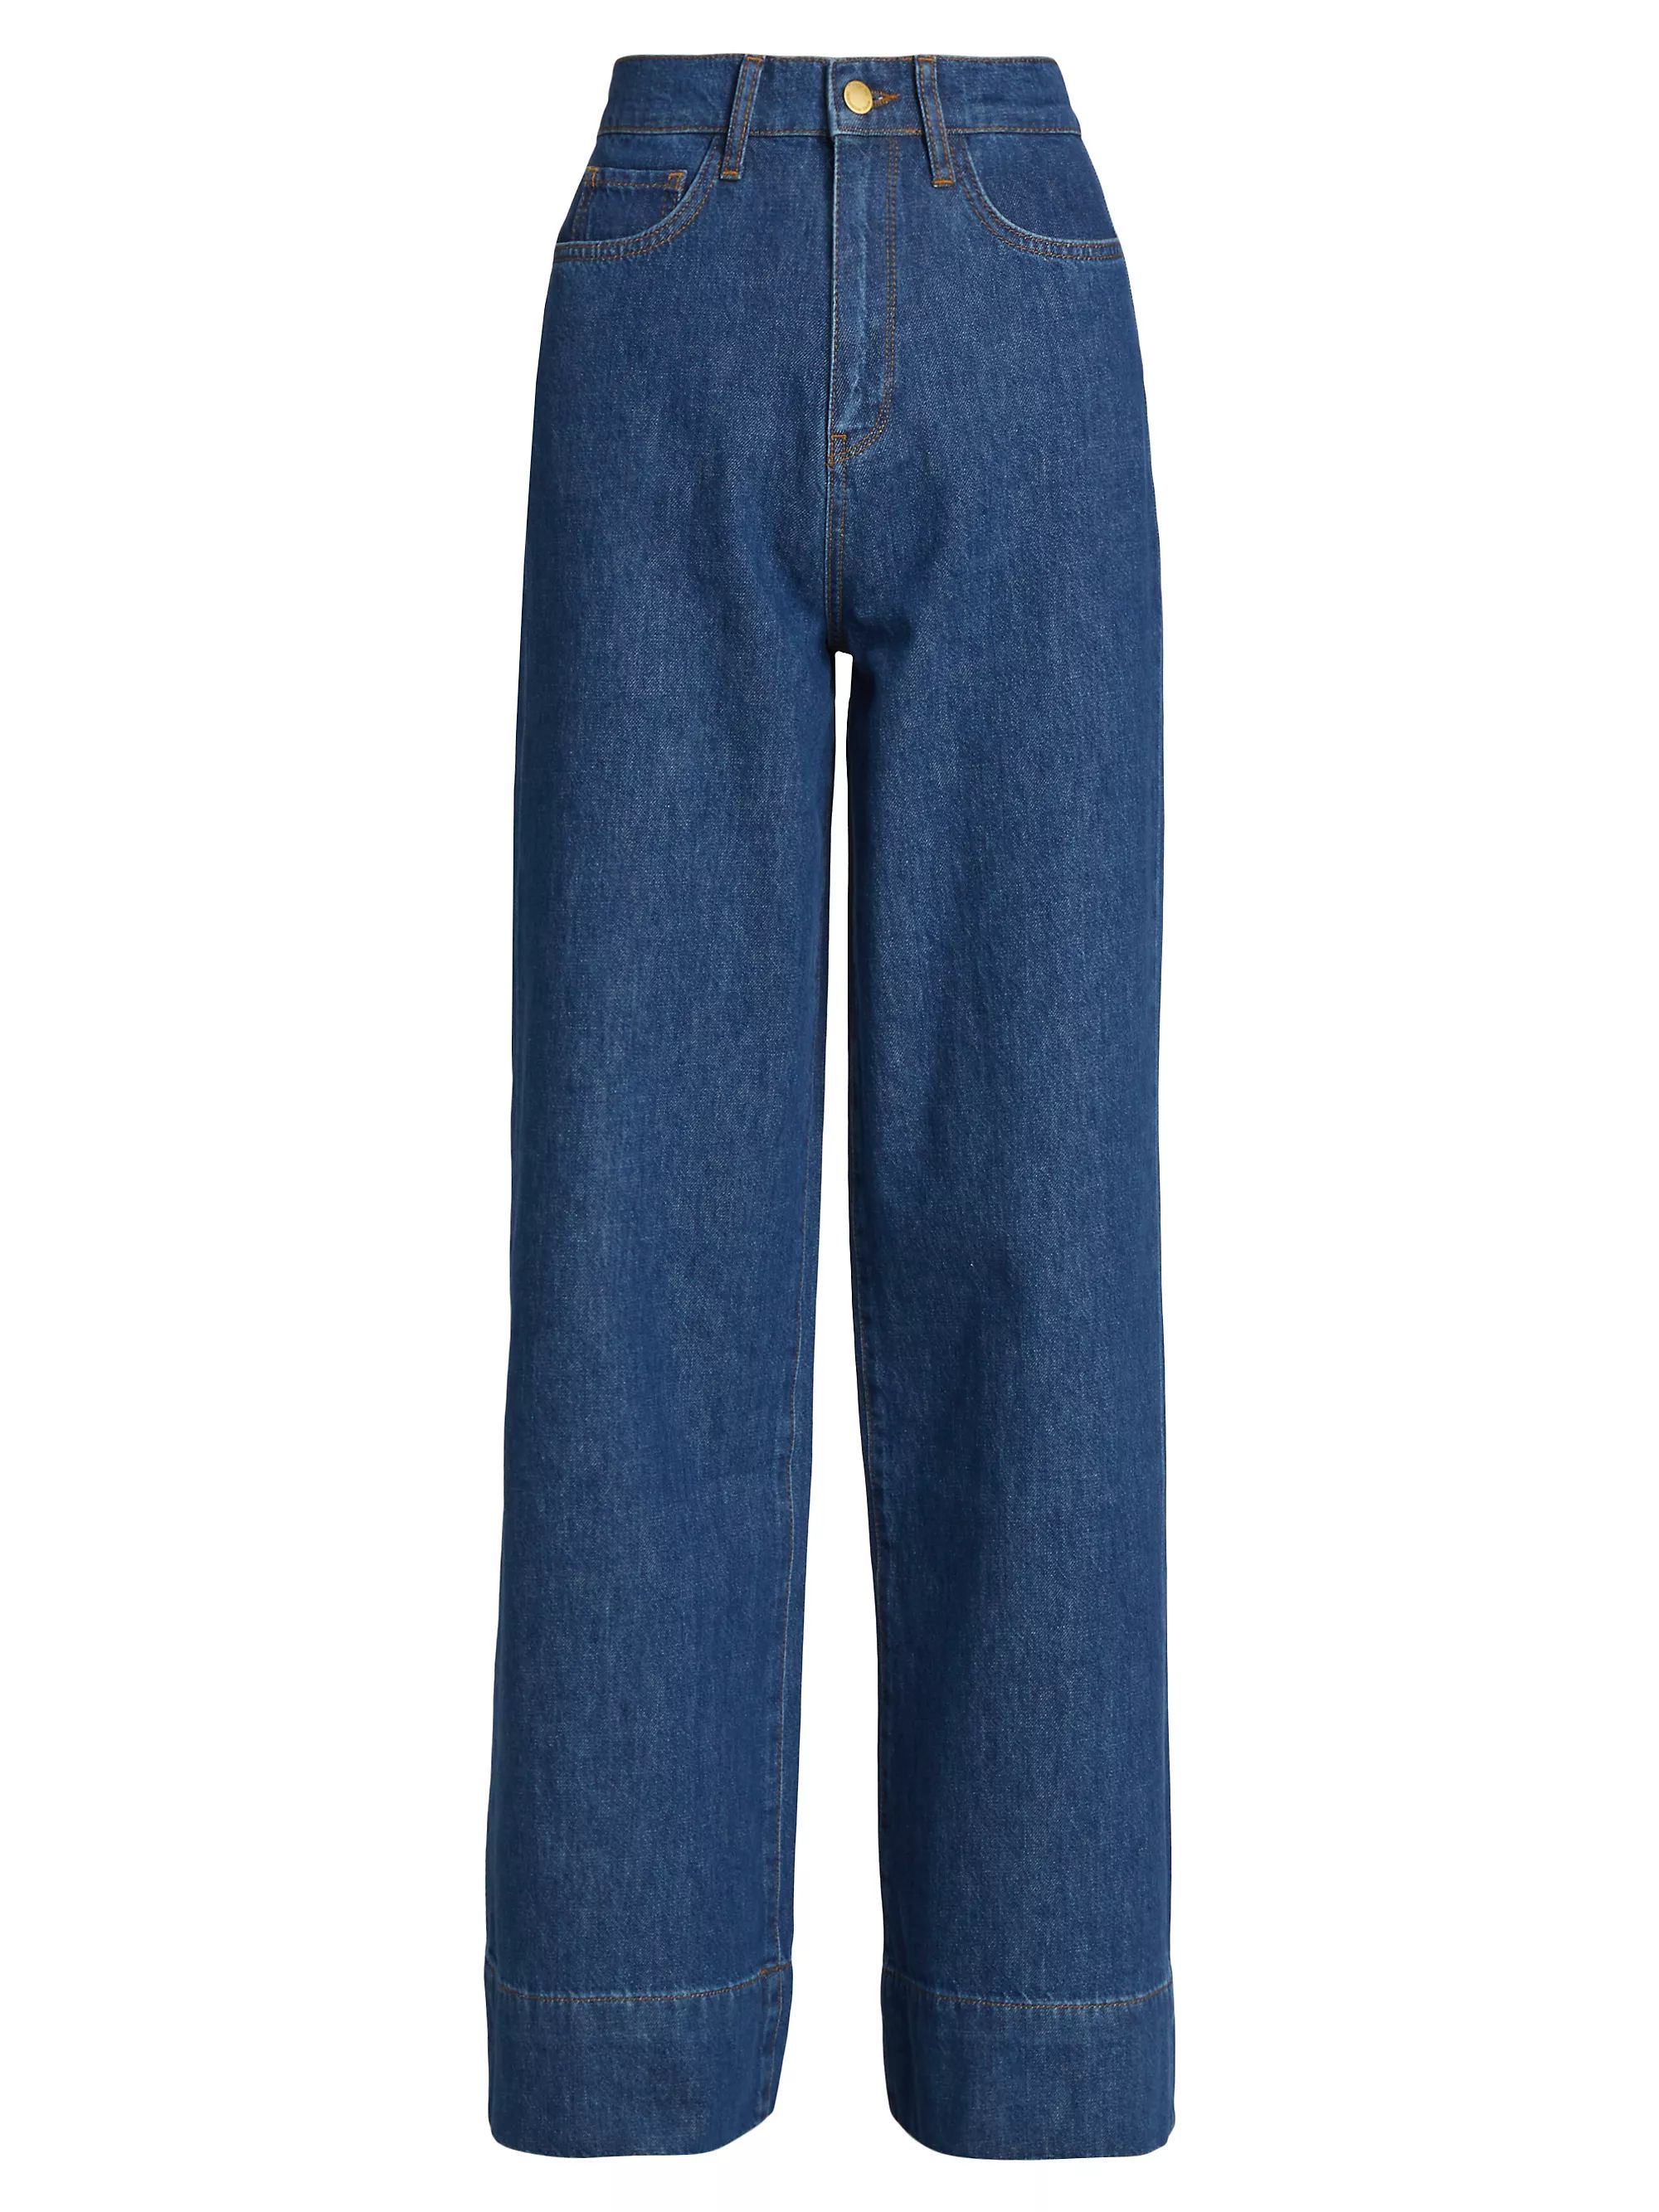 Ms. Onassis High-Rise Wide-Leg Jeans | Saks Fifth Avenue